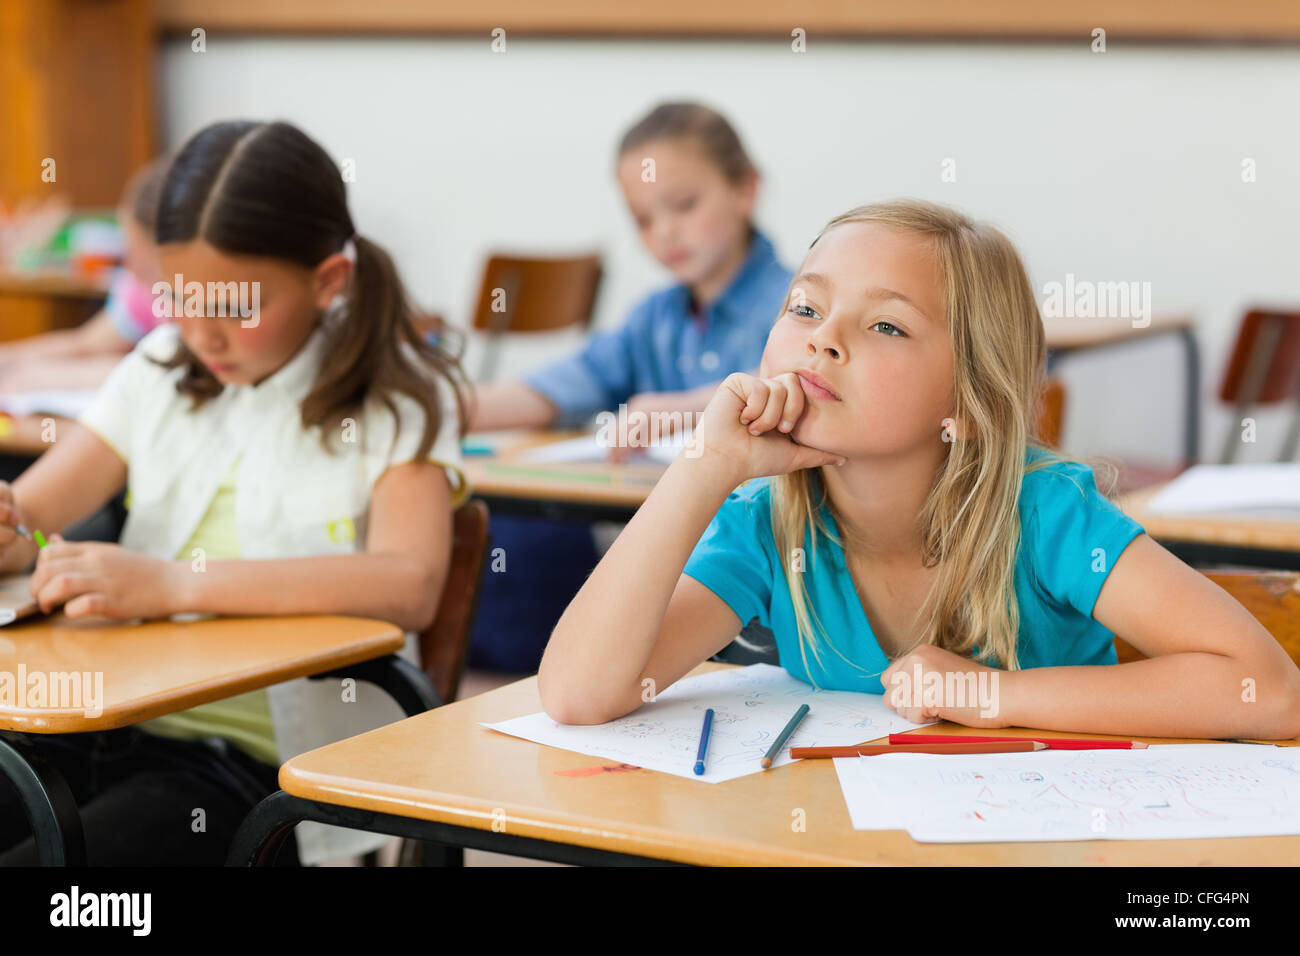 Girl in class doesn't seem very focused Stock Photo